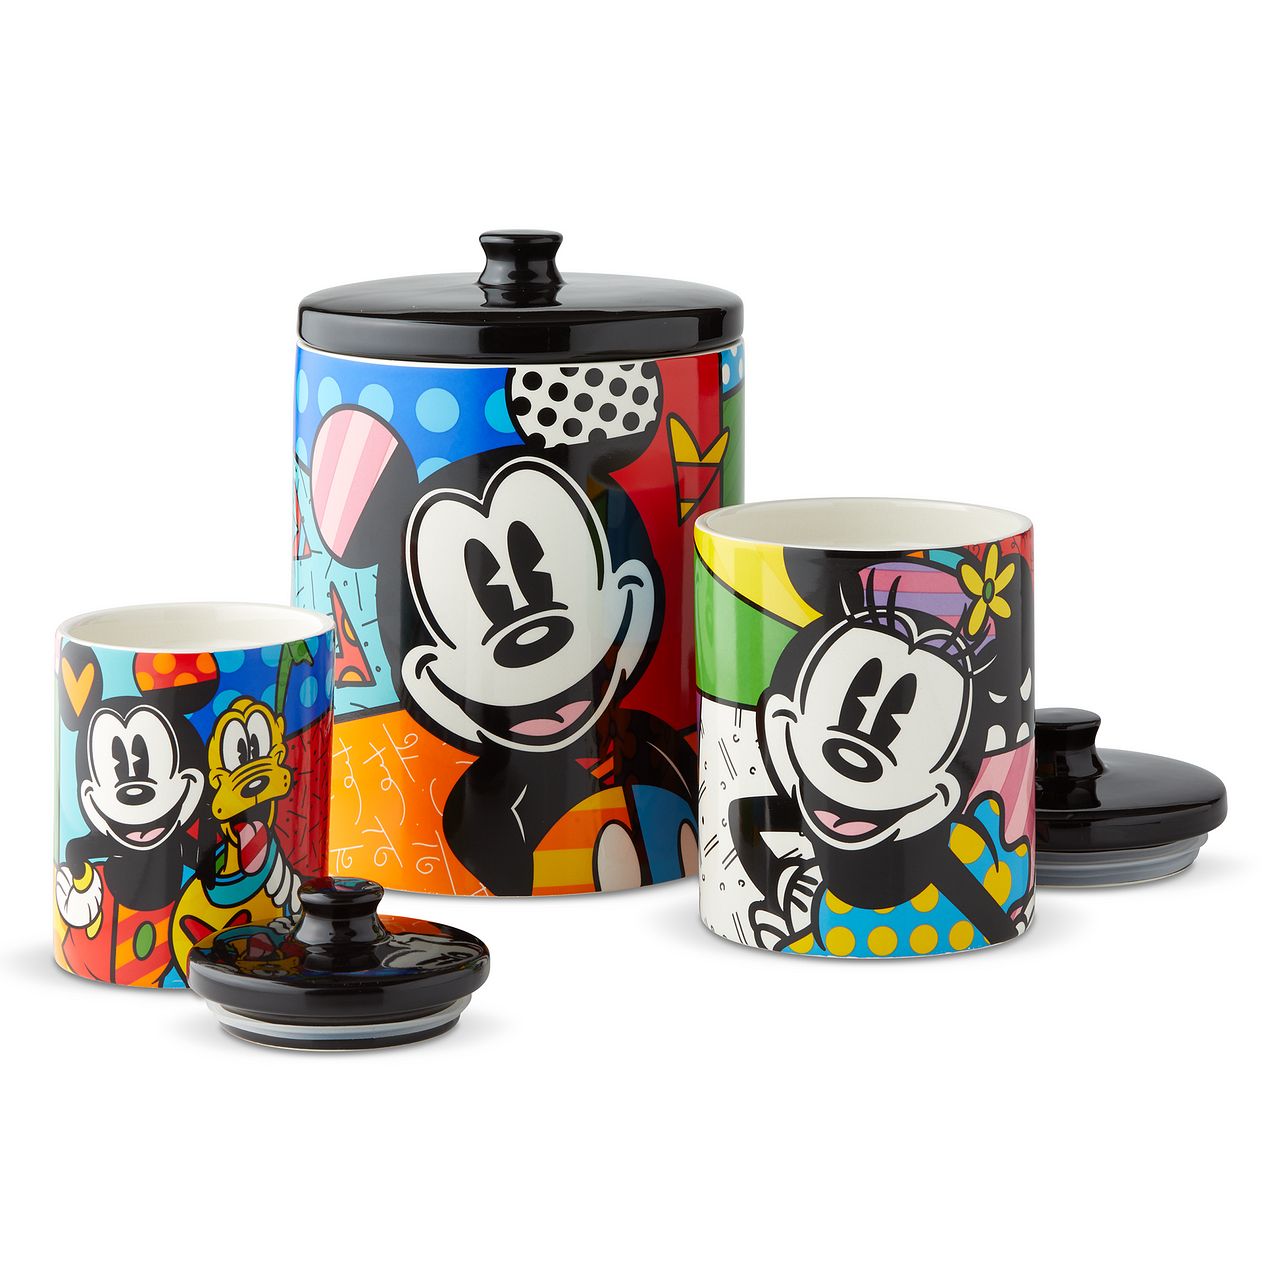 Mickey Mouse and Pluto Cookie Jar Small  Mickey Mouse and his best pal Pluto are so full of life and love in this cookie jar canister designed by Romero Britto. Bright, bold, and full of friendship, it will be hard to avoid a sweet treat from such a sweet duo. Perfect for dog treats, coffee, flour, sugar or cookies.